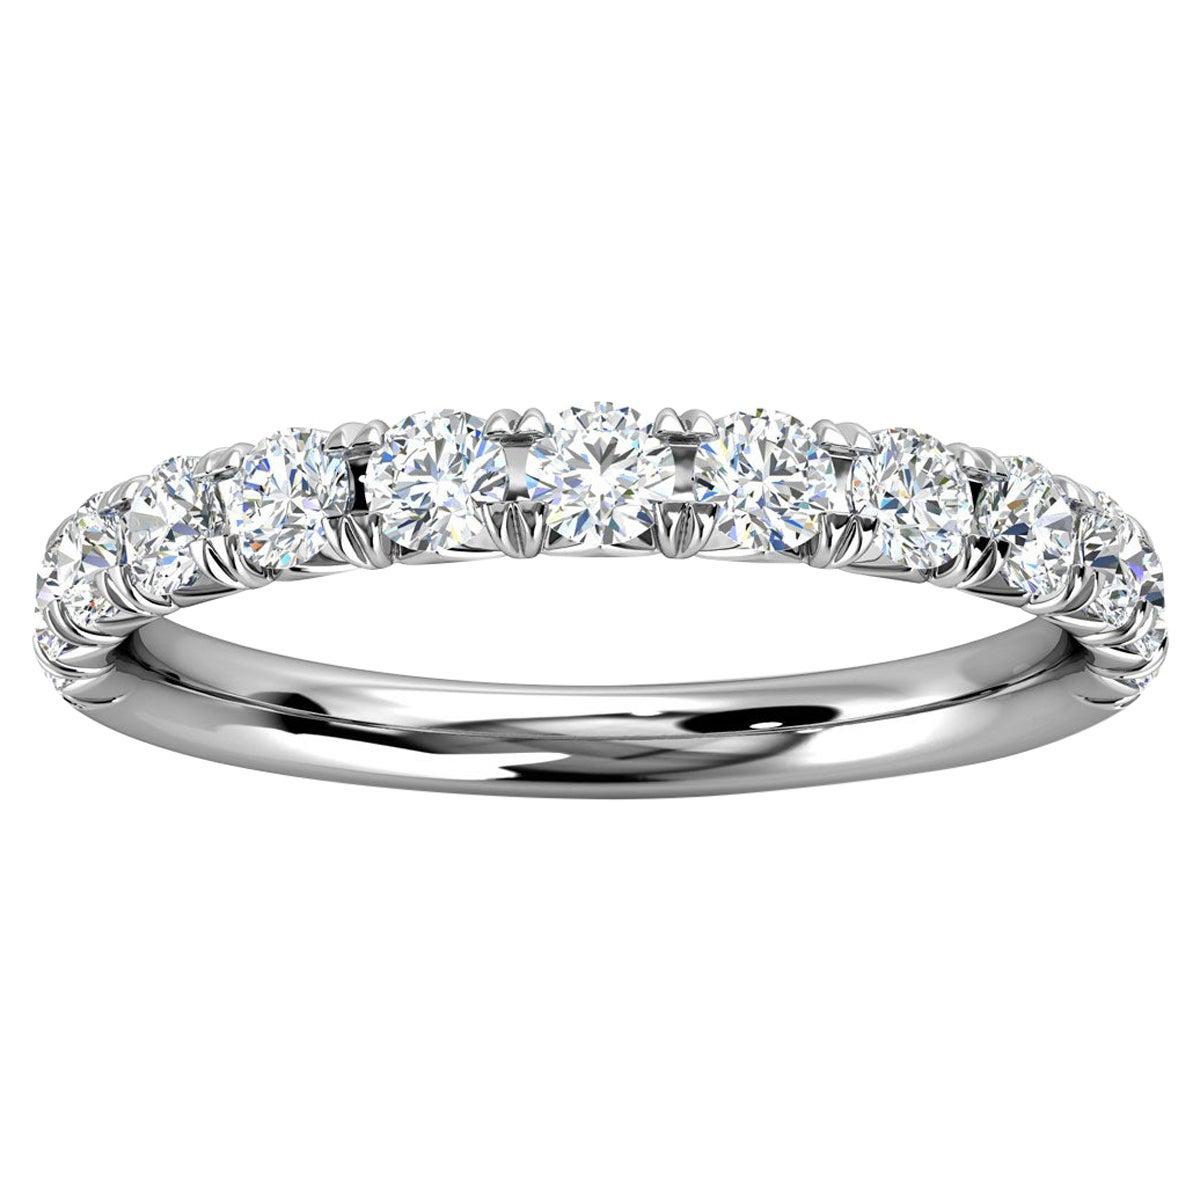 For Sale:  Platinum Voyage French Pave Diamond Ring '1/2 Ct. tw'